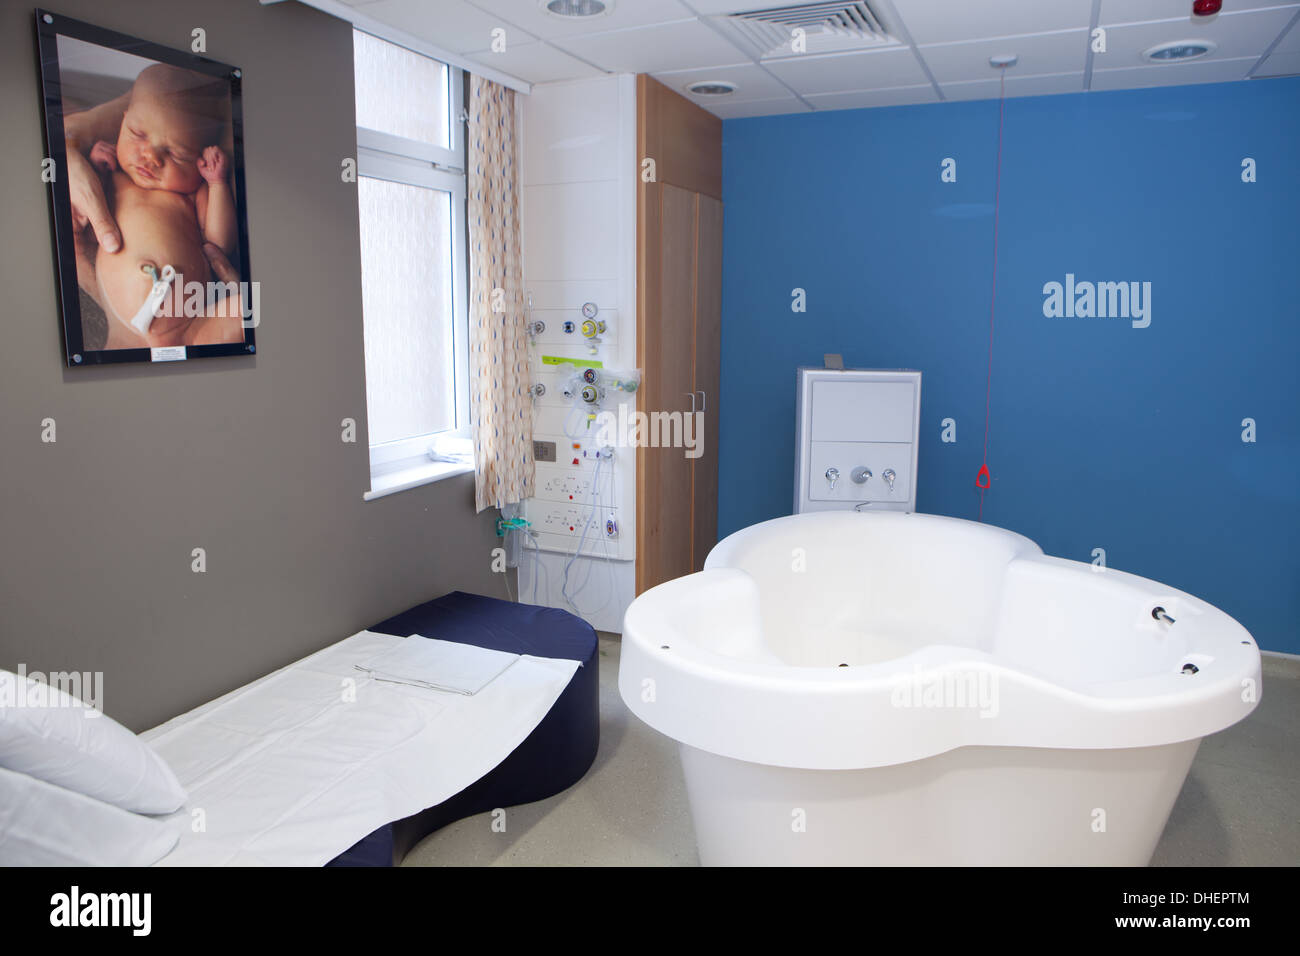 A maternity unit room with a birthing pool UK Stock Photo